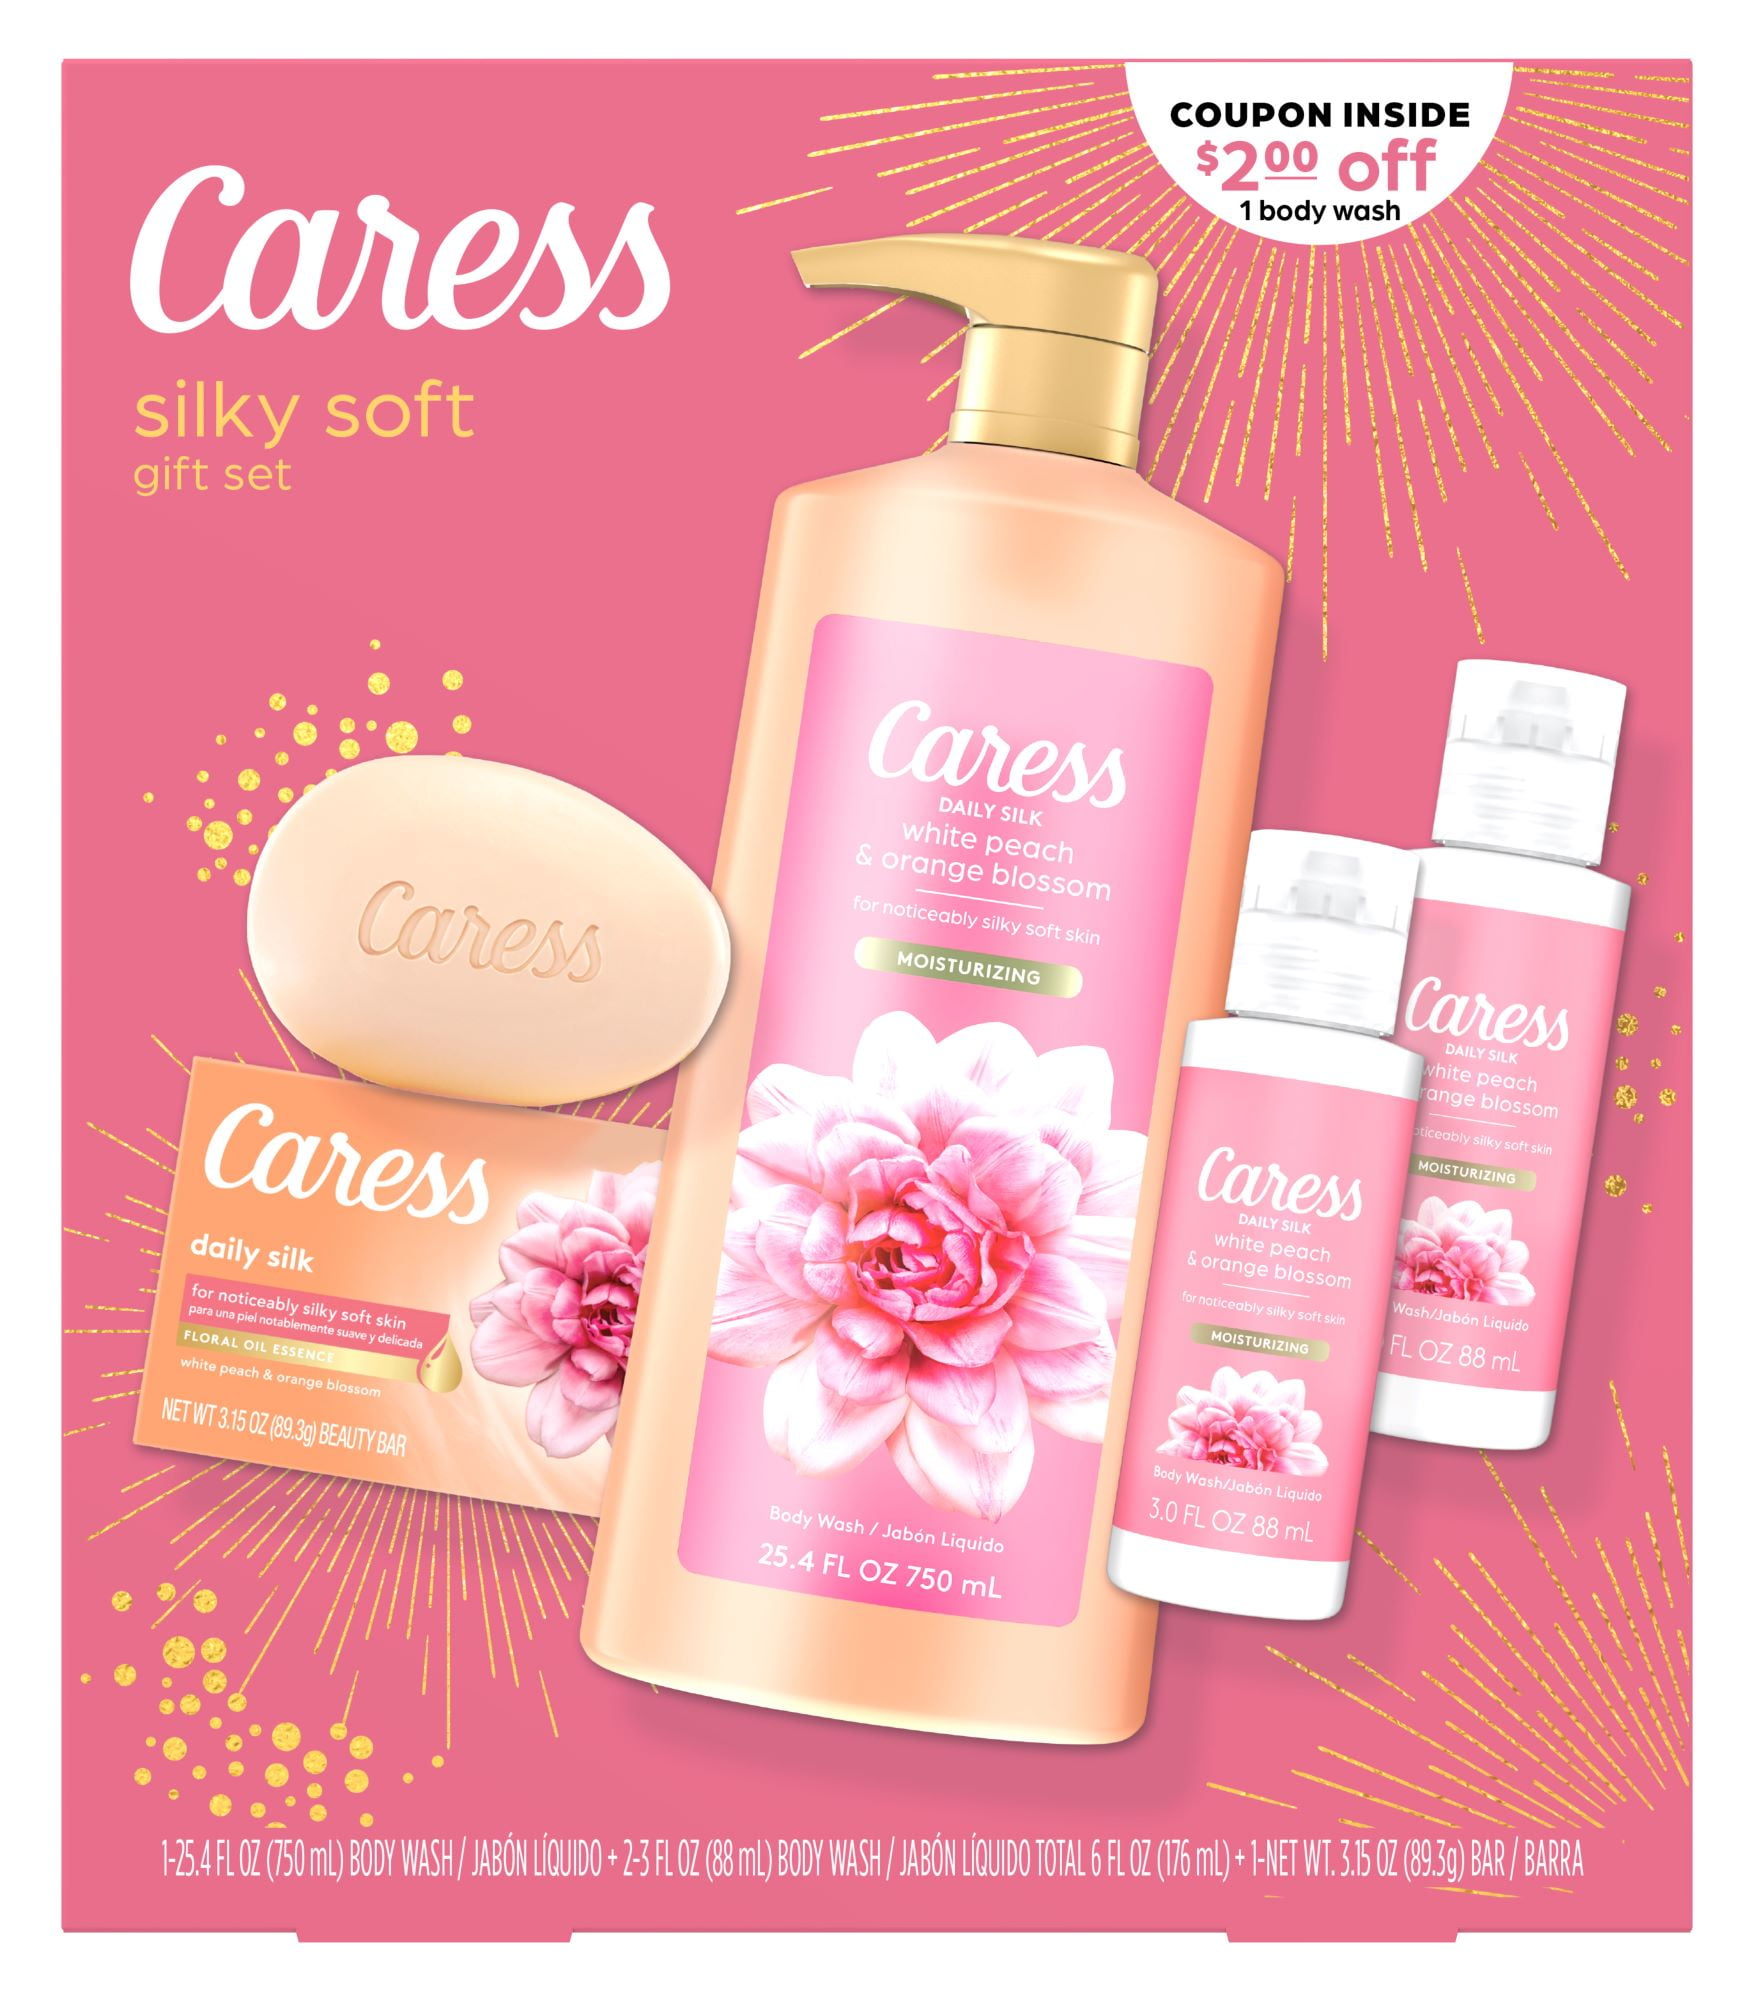 Caress Daily Silk Female Gift Pack: 25.4oz Body Wash, Bar Soap & Travel  Size for All Skin Types